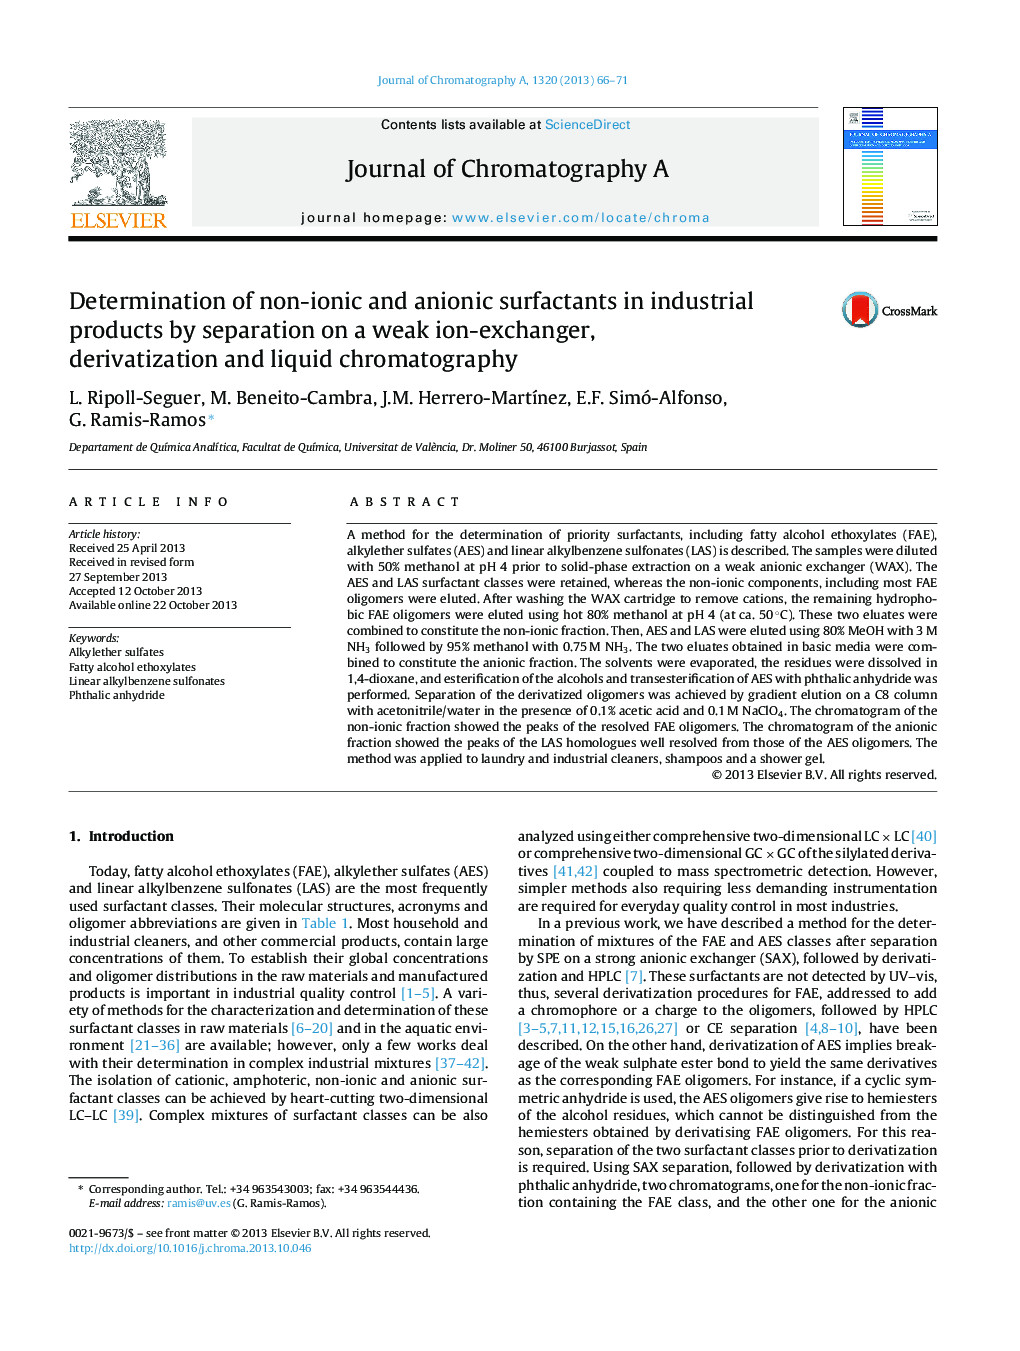 Determination of non-ionic and anionic surfactants in industrial products by separation on a weak ion-exchanger, derivatization and liquid chromatography